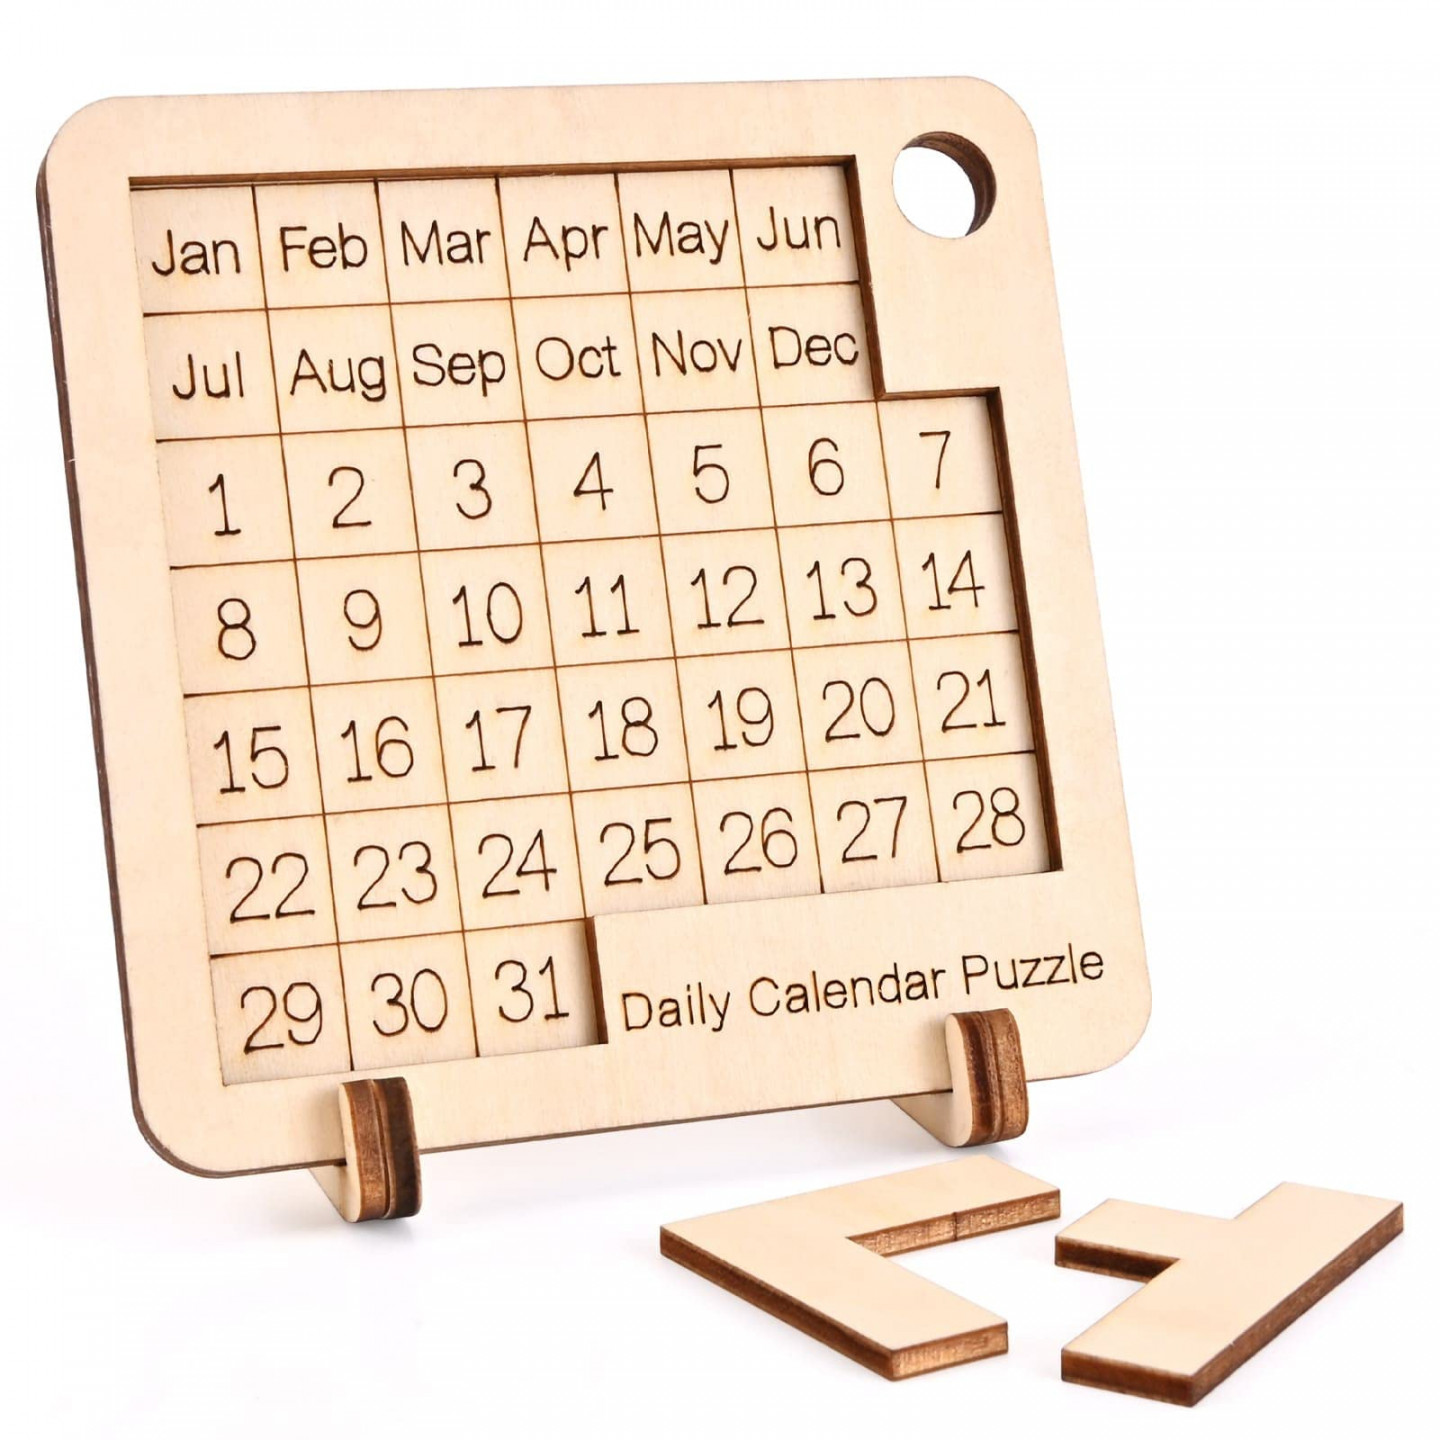 Wooden Daily Puzzle Calendar -  Days Brain Burning Jigsaw Puzzle Desk  Calendar for  Advent EvSee more Wooden Daily Puzzle Calendar -   Days